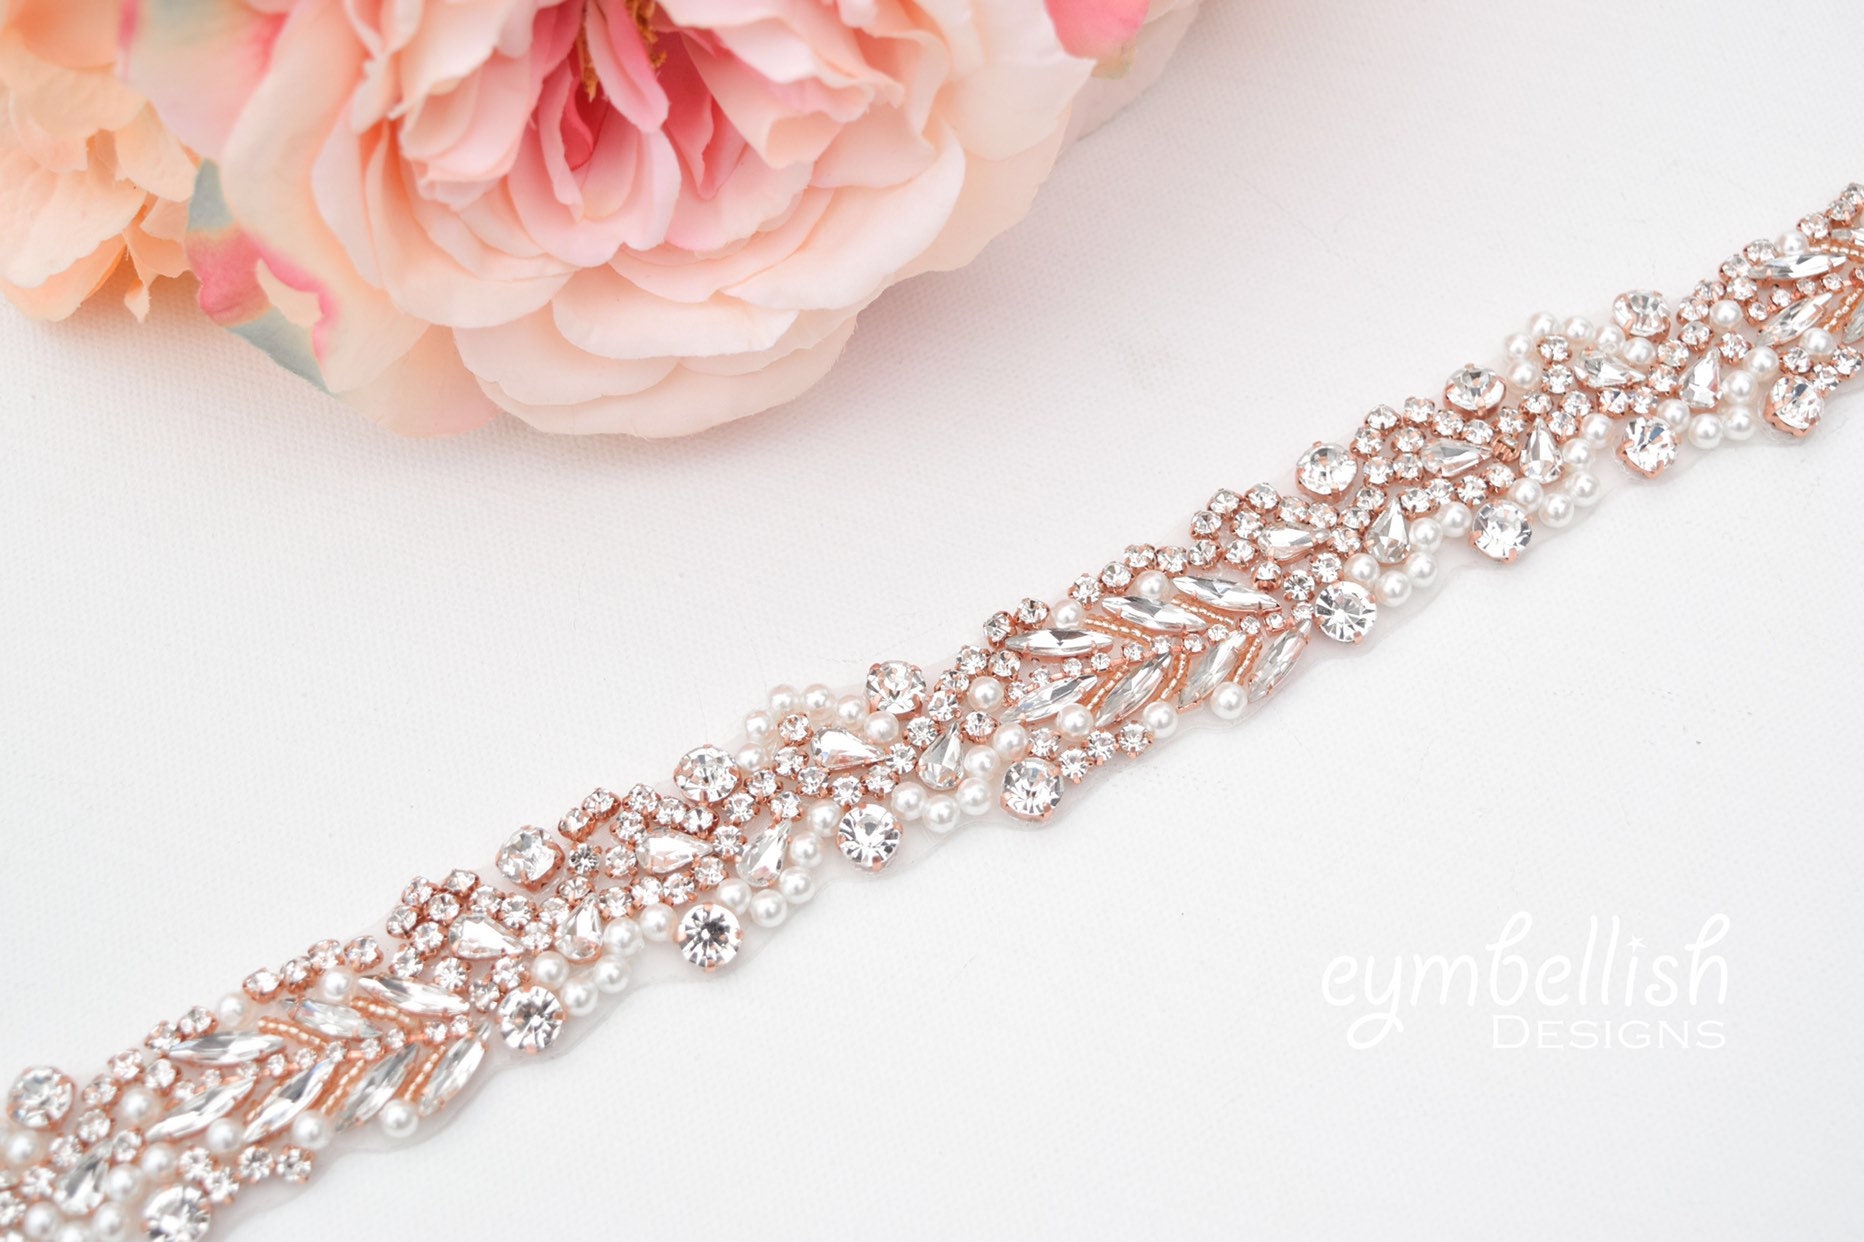 Wedding Accessories - Rhinestone Bridal Belt/Sash - Available in Rose Gold and Silver Rose Gold - Rhinestone Applique Only